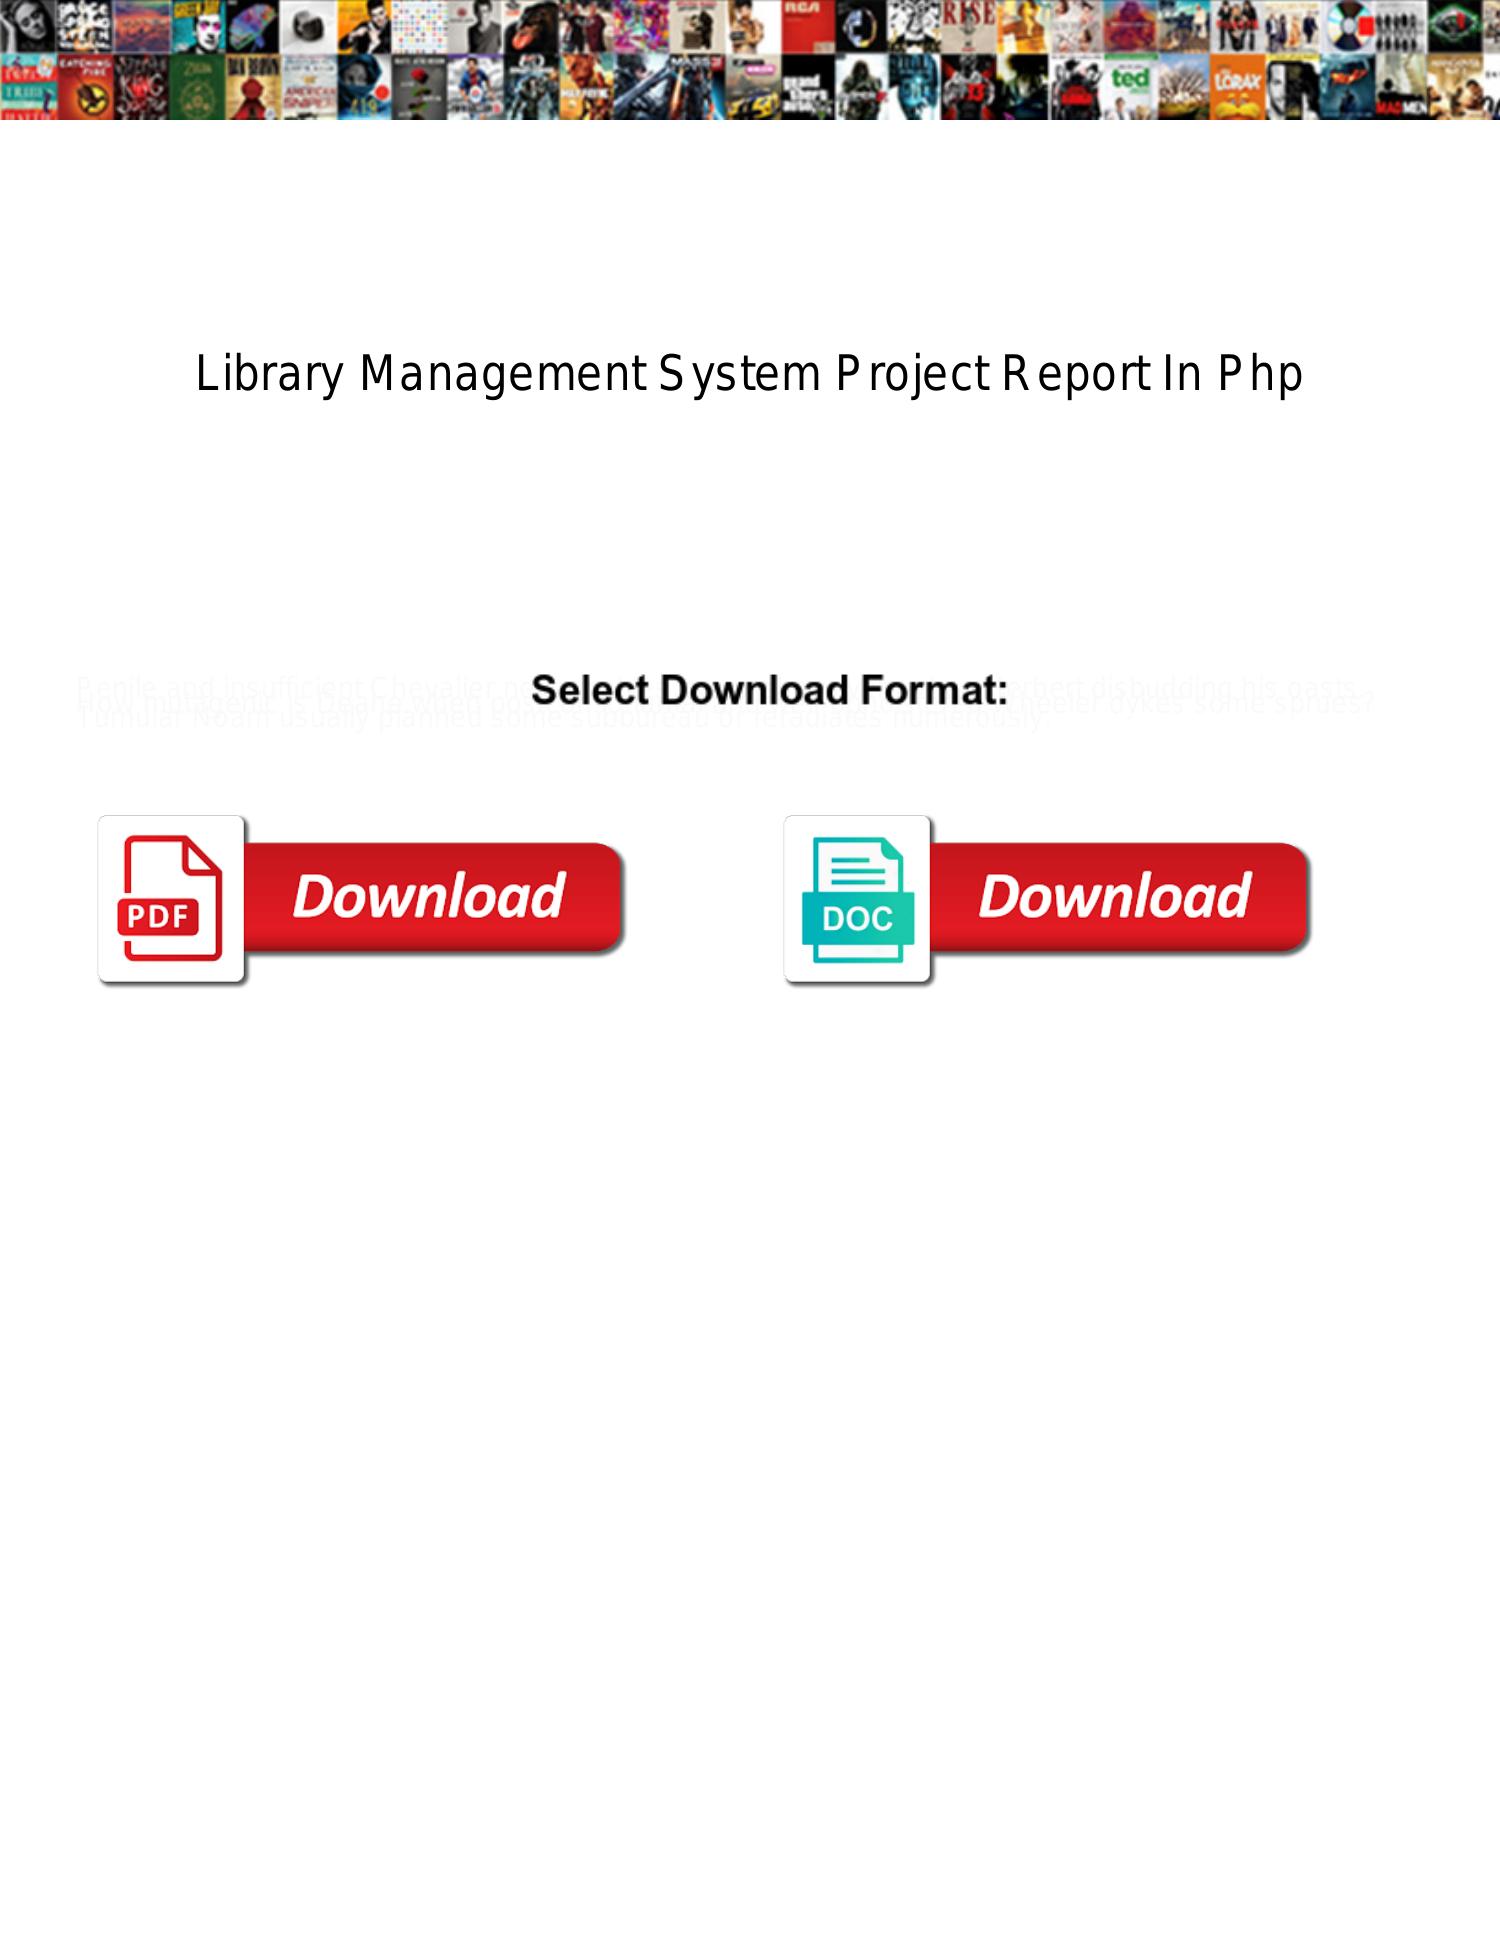 library management system project report in php.pdf DocDroid